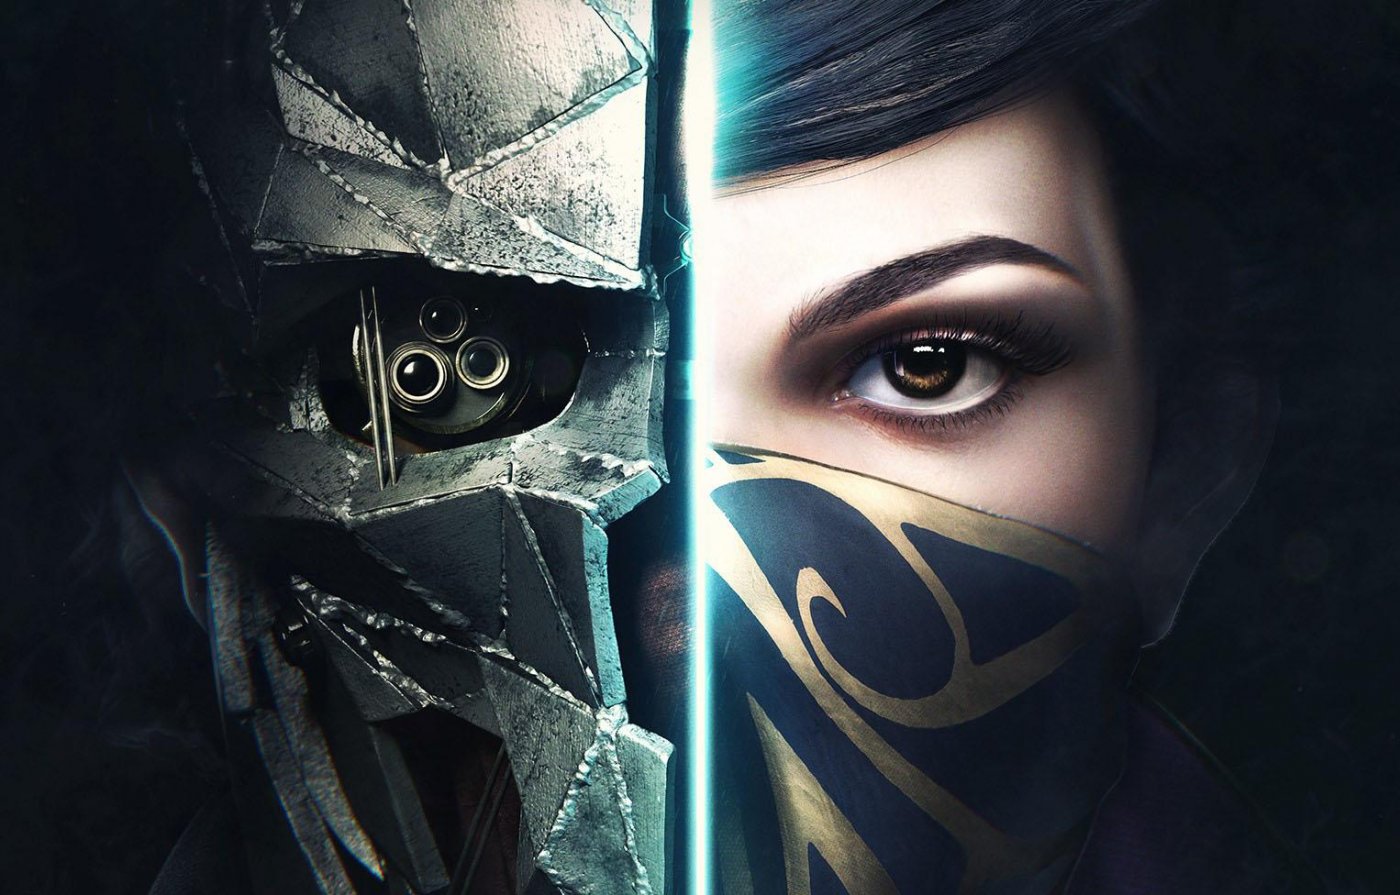 https://multiplayer.net-cdn.it/thumbs/images/2016/06/13/dishonored2_pc_frontcover_norate_1465294445_cropped_0_448_1526_1424_jpeg_1400x0_q85.jpg